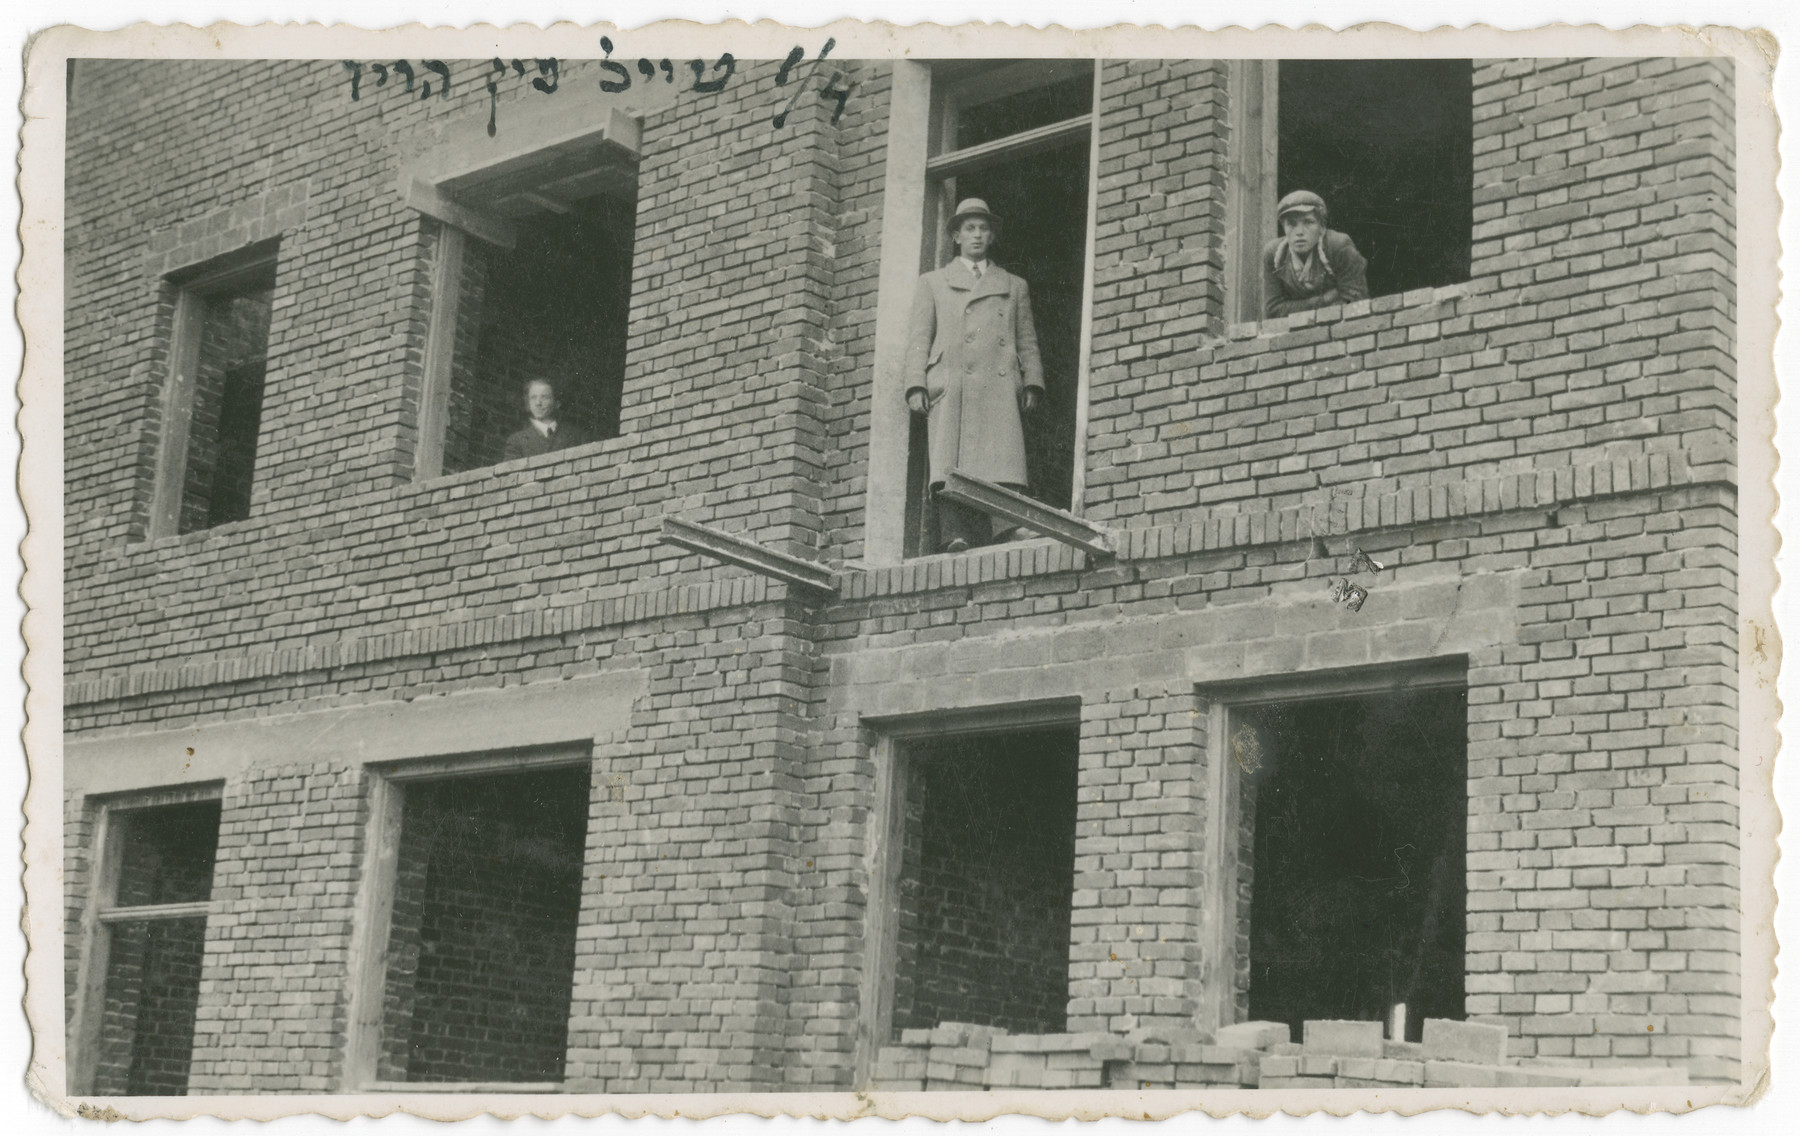 Members of the Nussbaum family poses by open windows of their apartment house which is under construction.